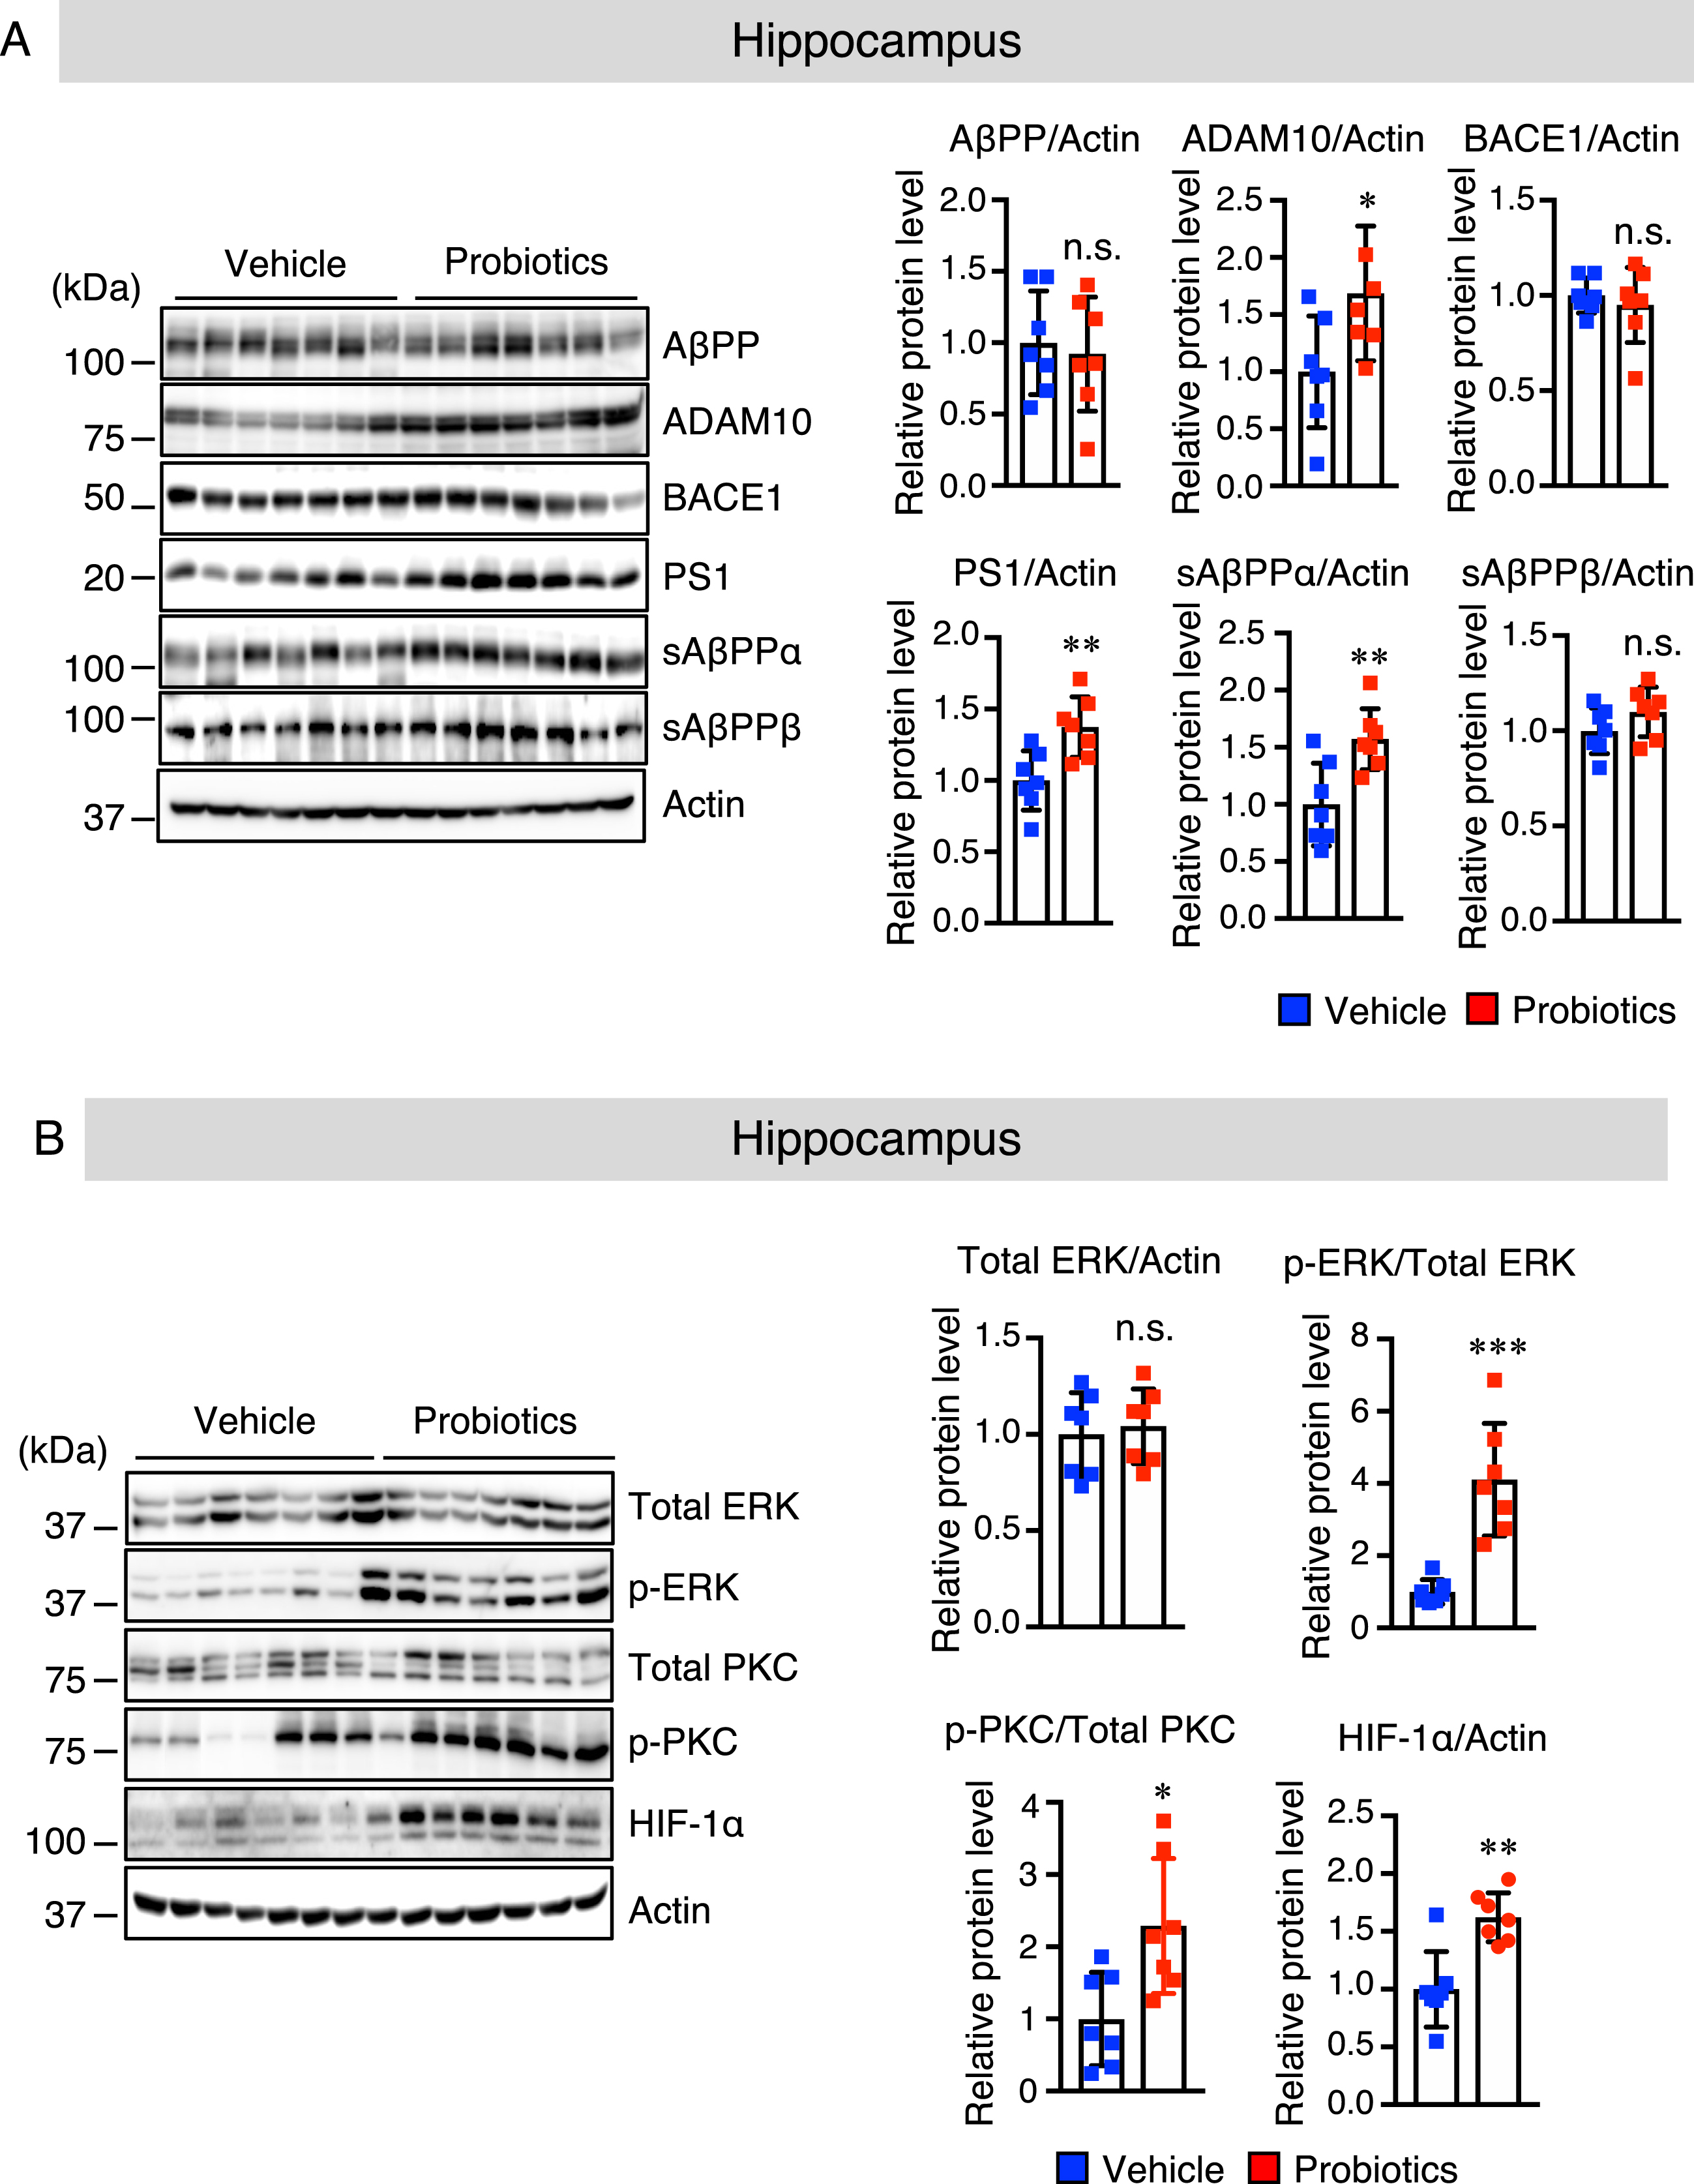 B. breve MCC1274 supplementation upregulates ADAM10 protein level in the hippocampus of AppNL-G-F mice. Protein levels of AβPP, ADAM10, BACE1, PS1, sAβPPα, sAβPPβ, and actin (A) and protein levels of total ERK, phosphorylated (p) ERK, total PKC, pPKC, HIF-1α, and actin (B) in the hippocampus were determined by western blot analysis, quantified by densitometry, normalized to actin level, and expressed as a value relative to the control. Data are expressed as the mean±SD, n = 7. *p < 0.05, **p < 0.01, ***p < 0.001 compared with the vehicle group, n.s., no significant difference, as determined by Student’s t-test.